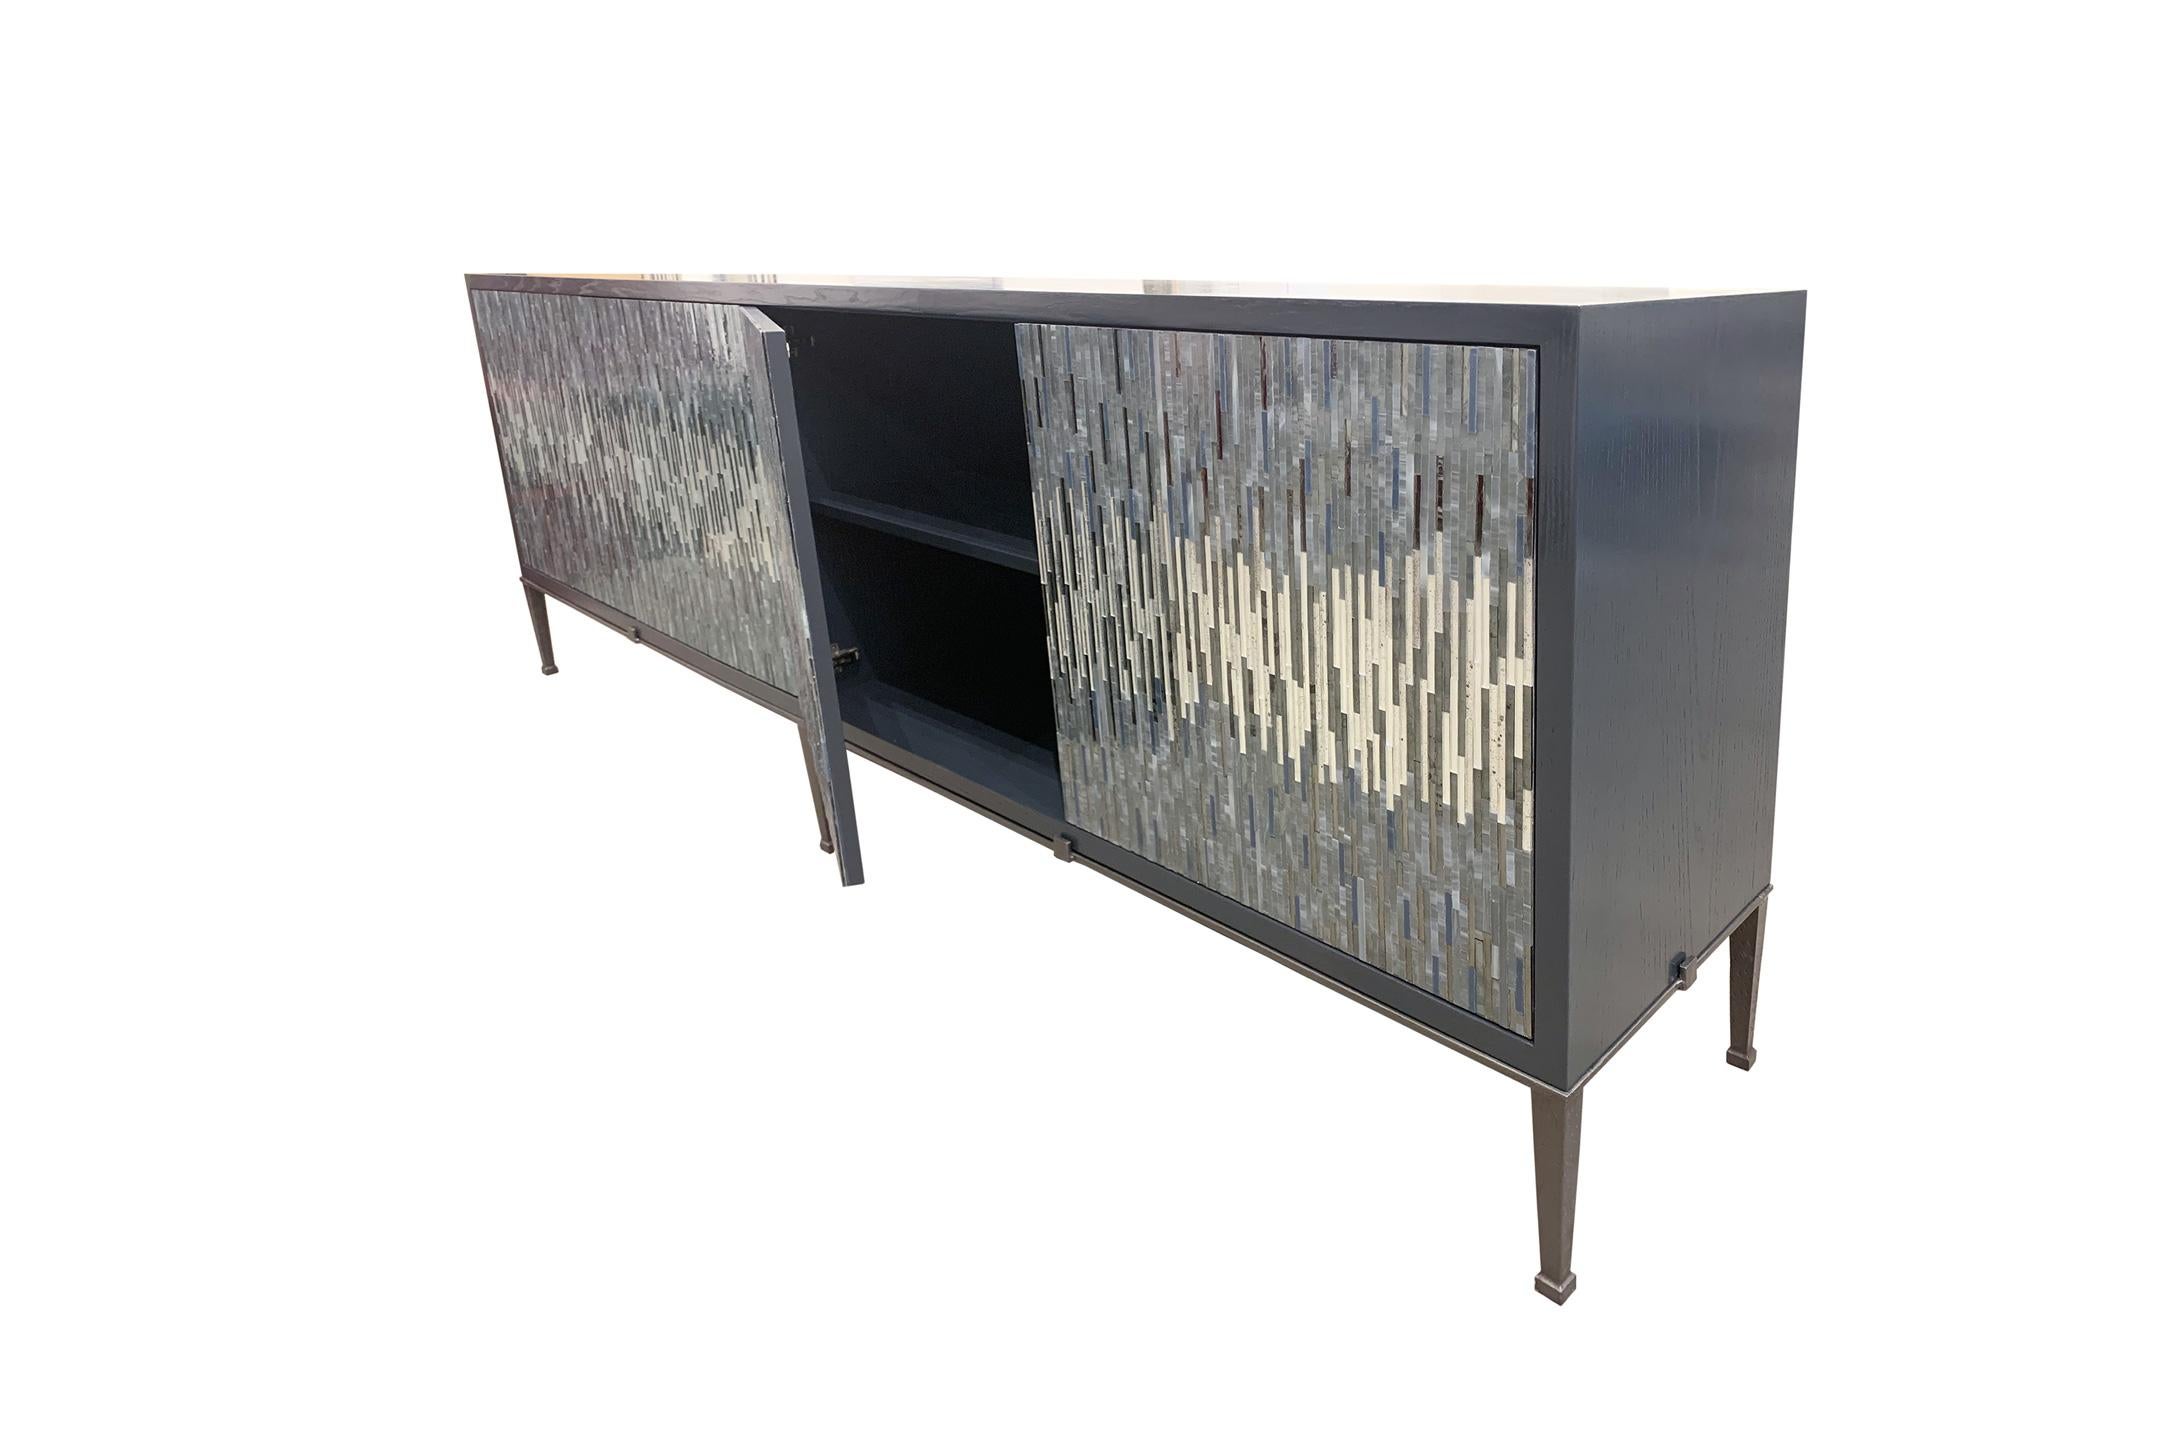 The industrial buffet by Ercole Home has a 4-door front, with dark gray lacquer wood finish on oak. Handcut glass mosaics in gray, silver, Pewter decorate the surface in a continuous wave pattern.
The metal Milano base with small decorative tabs is